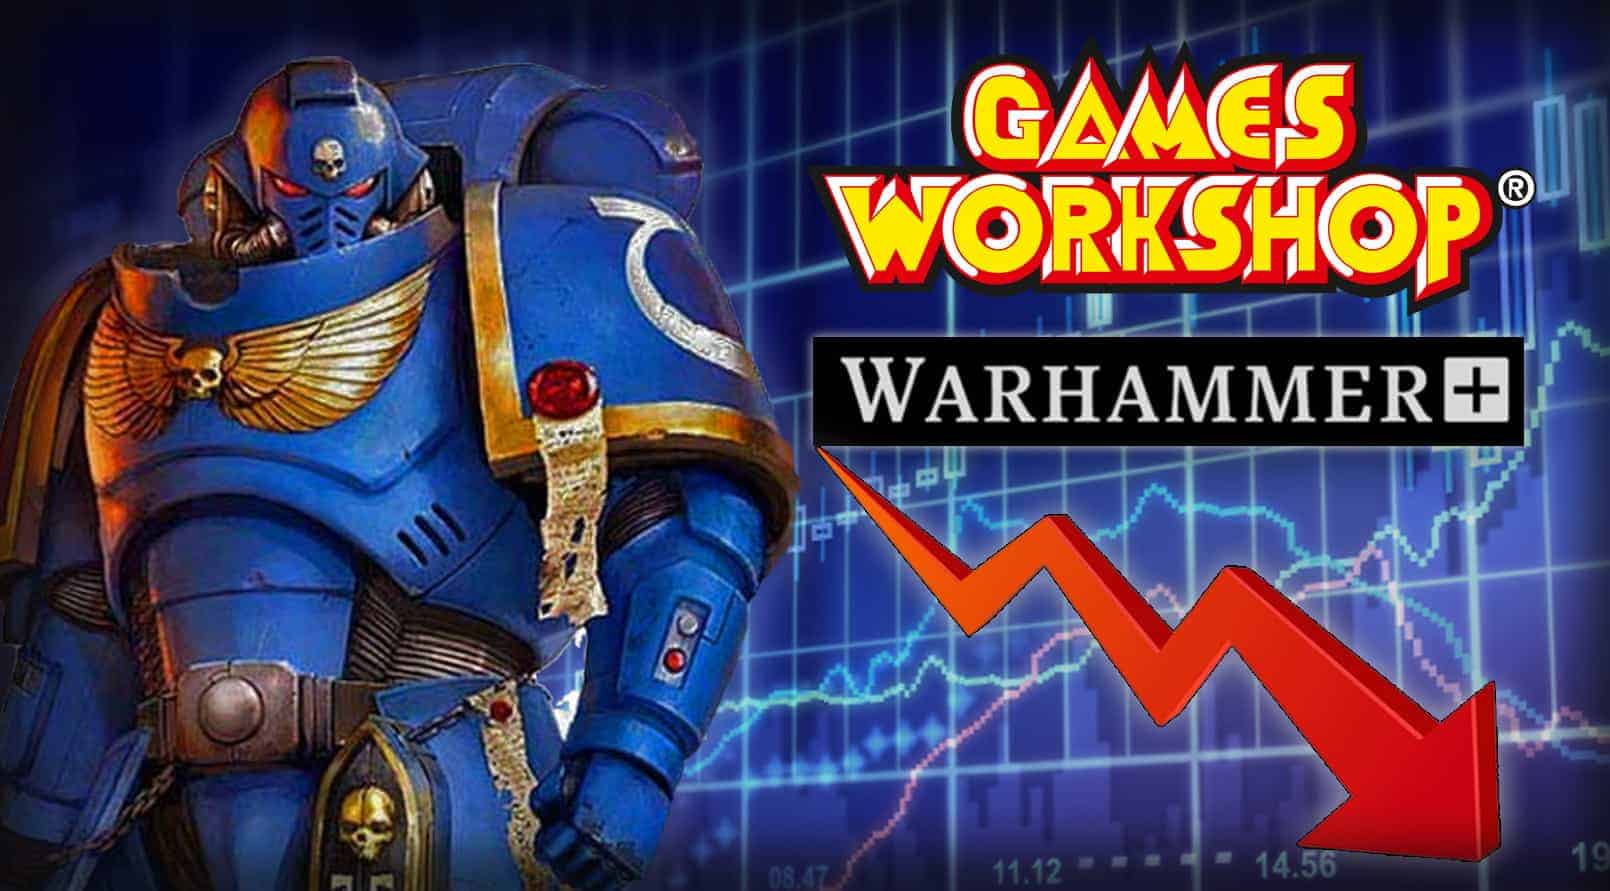 warhammer-plus-is-why-games-workshop-stock-is-dropping